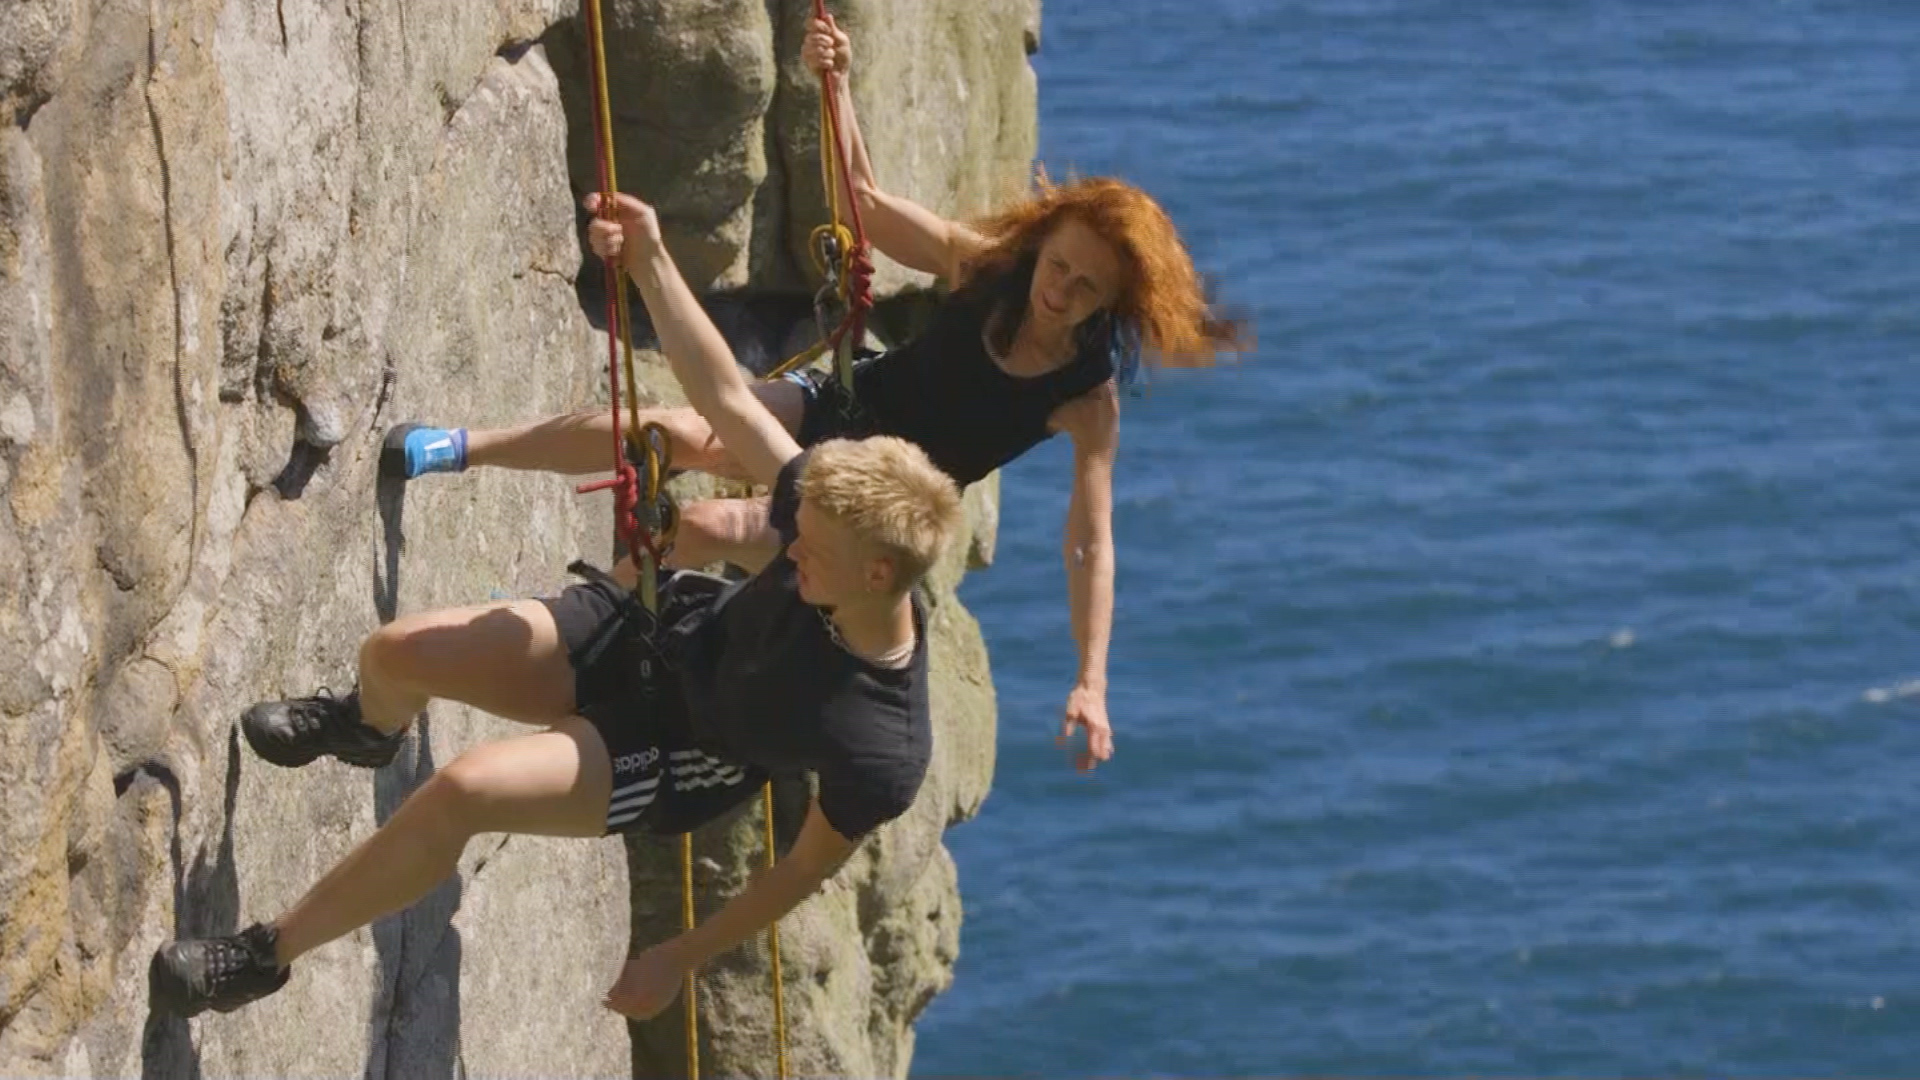 On a sunny day mother and son abseil down the side of golden Cornwall cliffs with a bright blue sea in the background